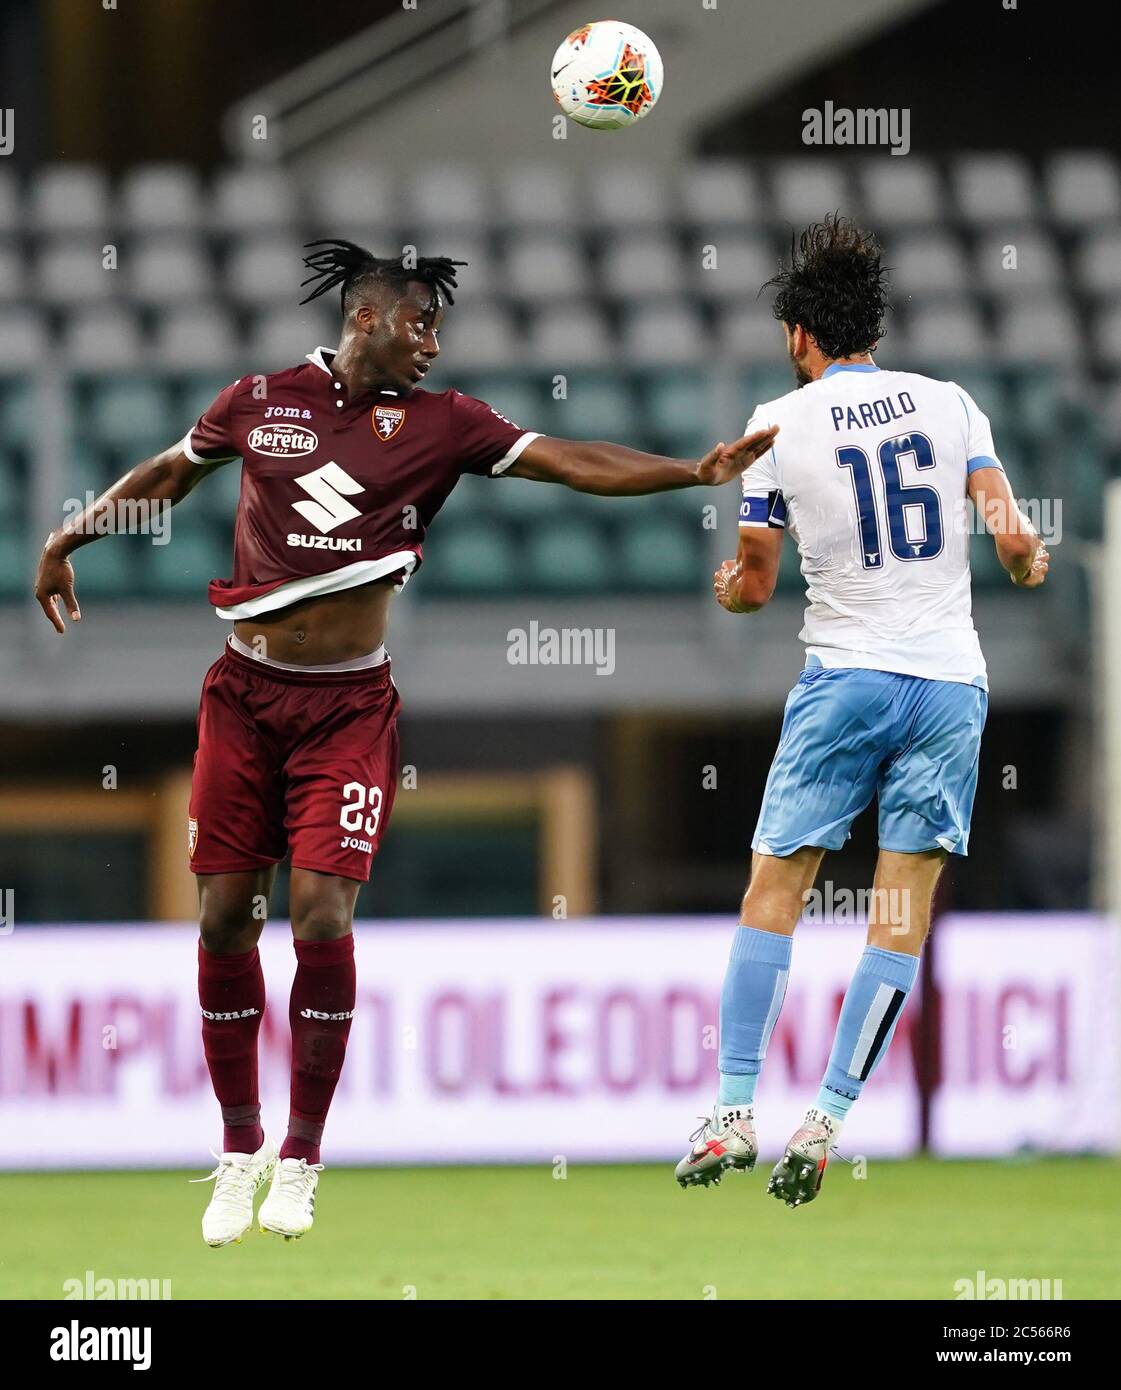 Turin. 1st July, 2020. Torino's Soualiho Meite (L) vies with Lazio's Marco Parolo during a Serie A football match between Torino and Lazio in Turin, Italy, June 30, 2020. Credit: Xinhua/Alamy Live News Stock Photo